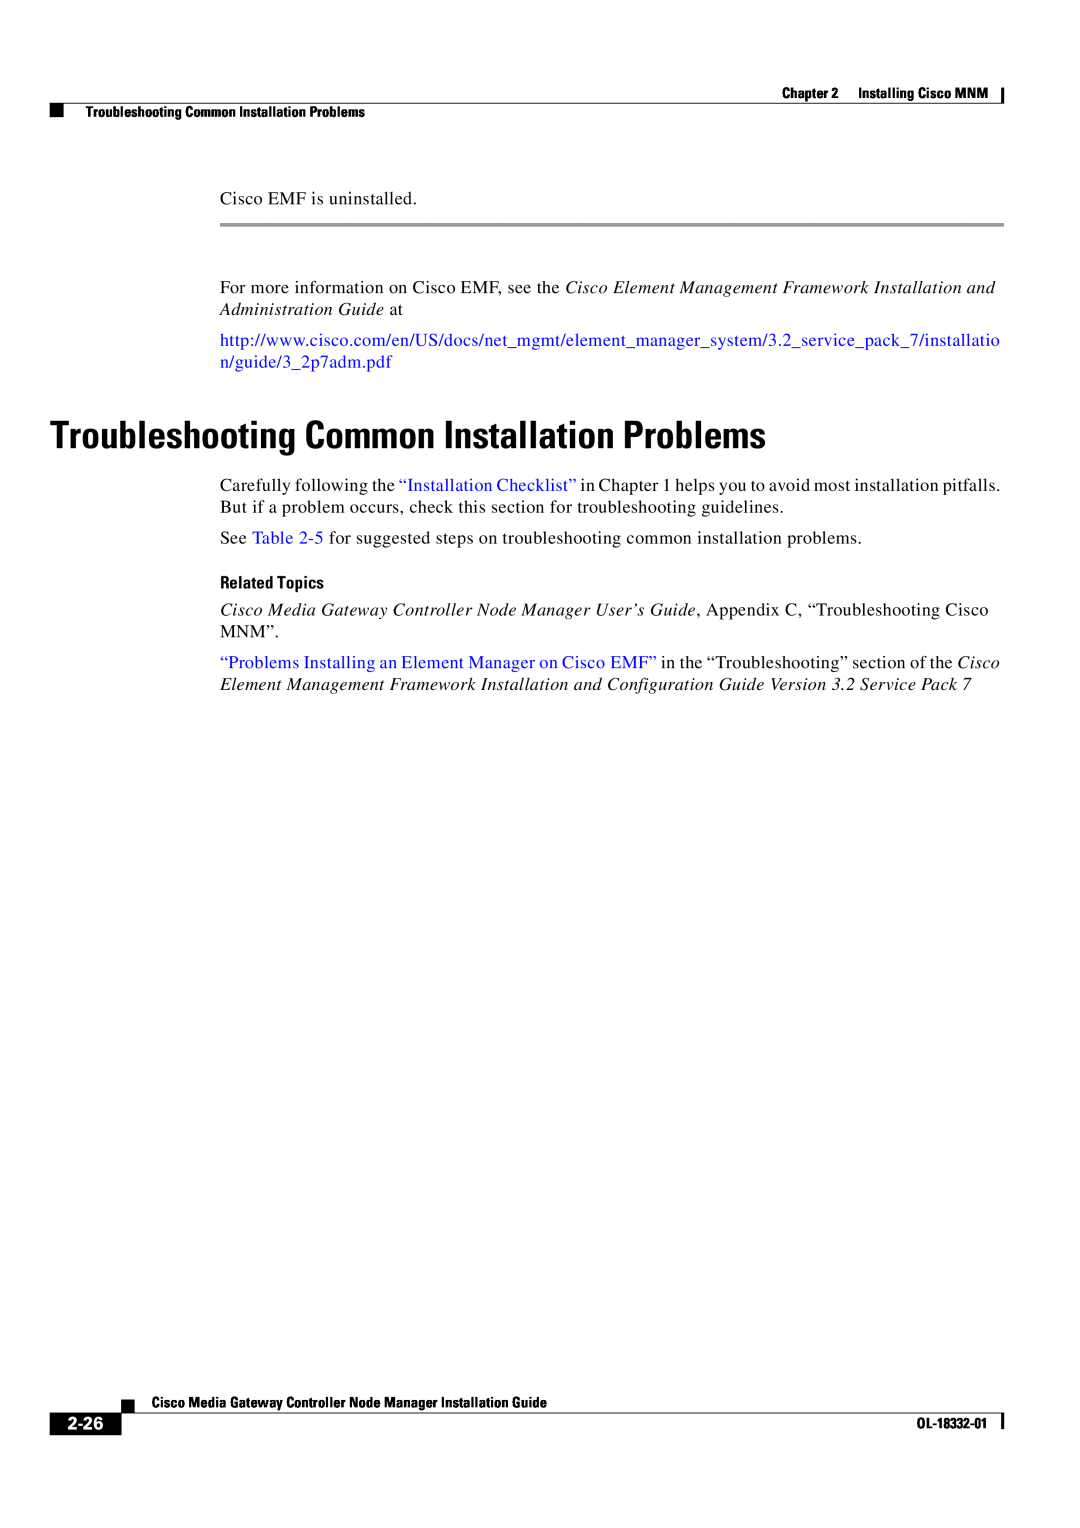 Cisco Systems Media Gateway Controller Node Manager Troubleshooting Common Installation Problems, Related Topics, 2-26 